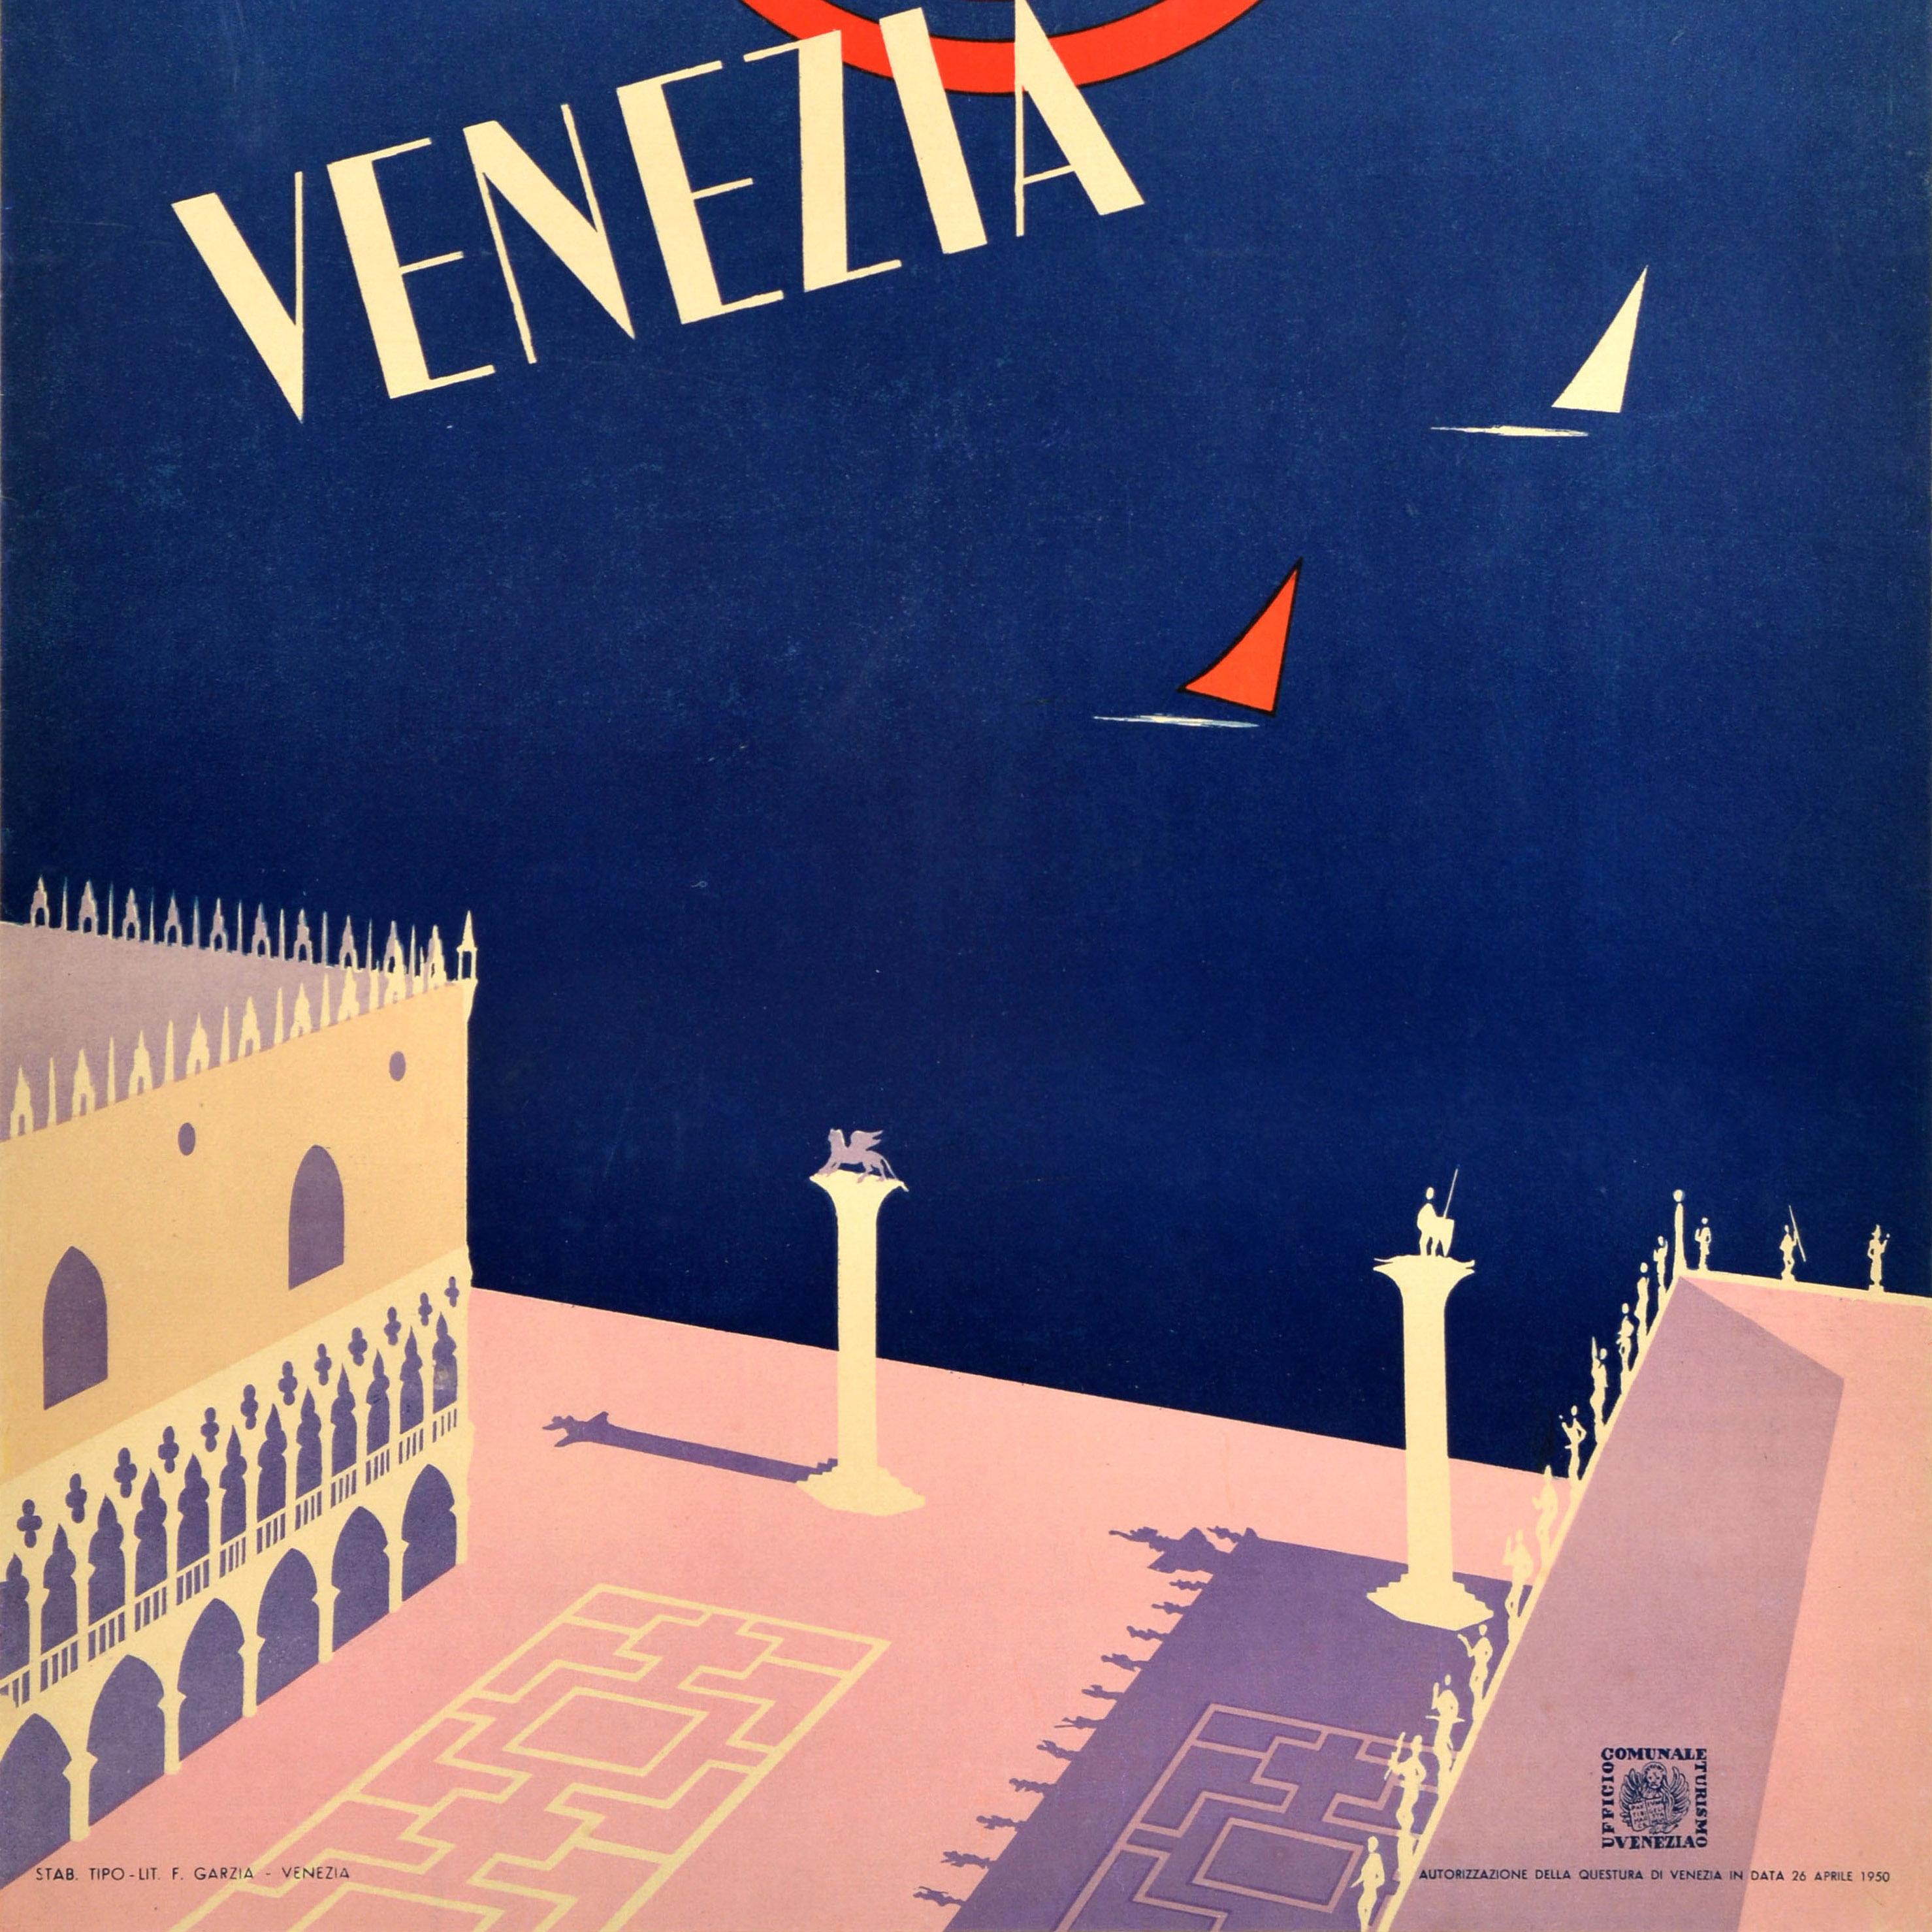 Original vintage travel poster for Venice Italy - Lido Venezia - featuring a great mid-century design depicting a view over the historic Piazza San Marco / St Mark's Square and The Lion of Venice and St Theodore statues on columns casting shadows in